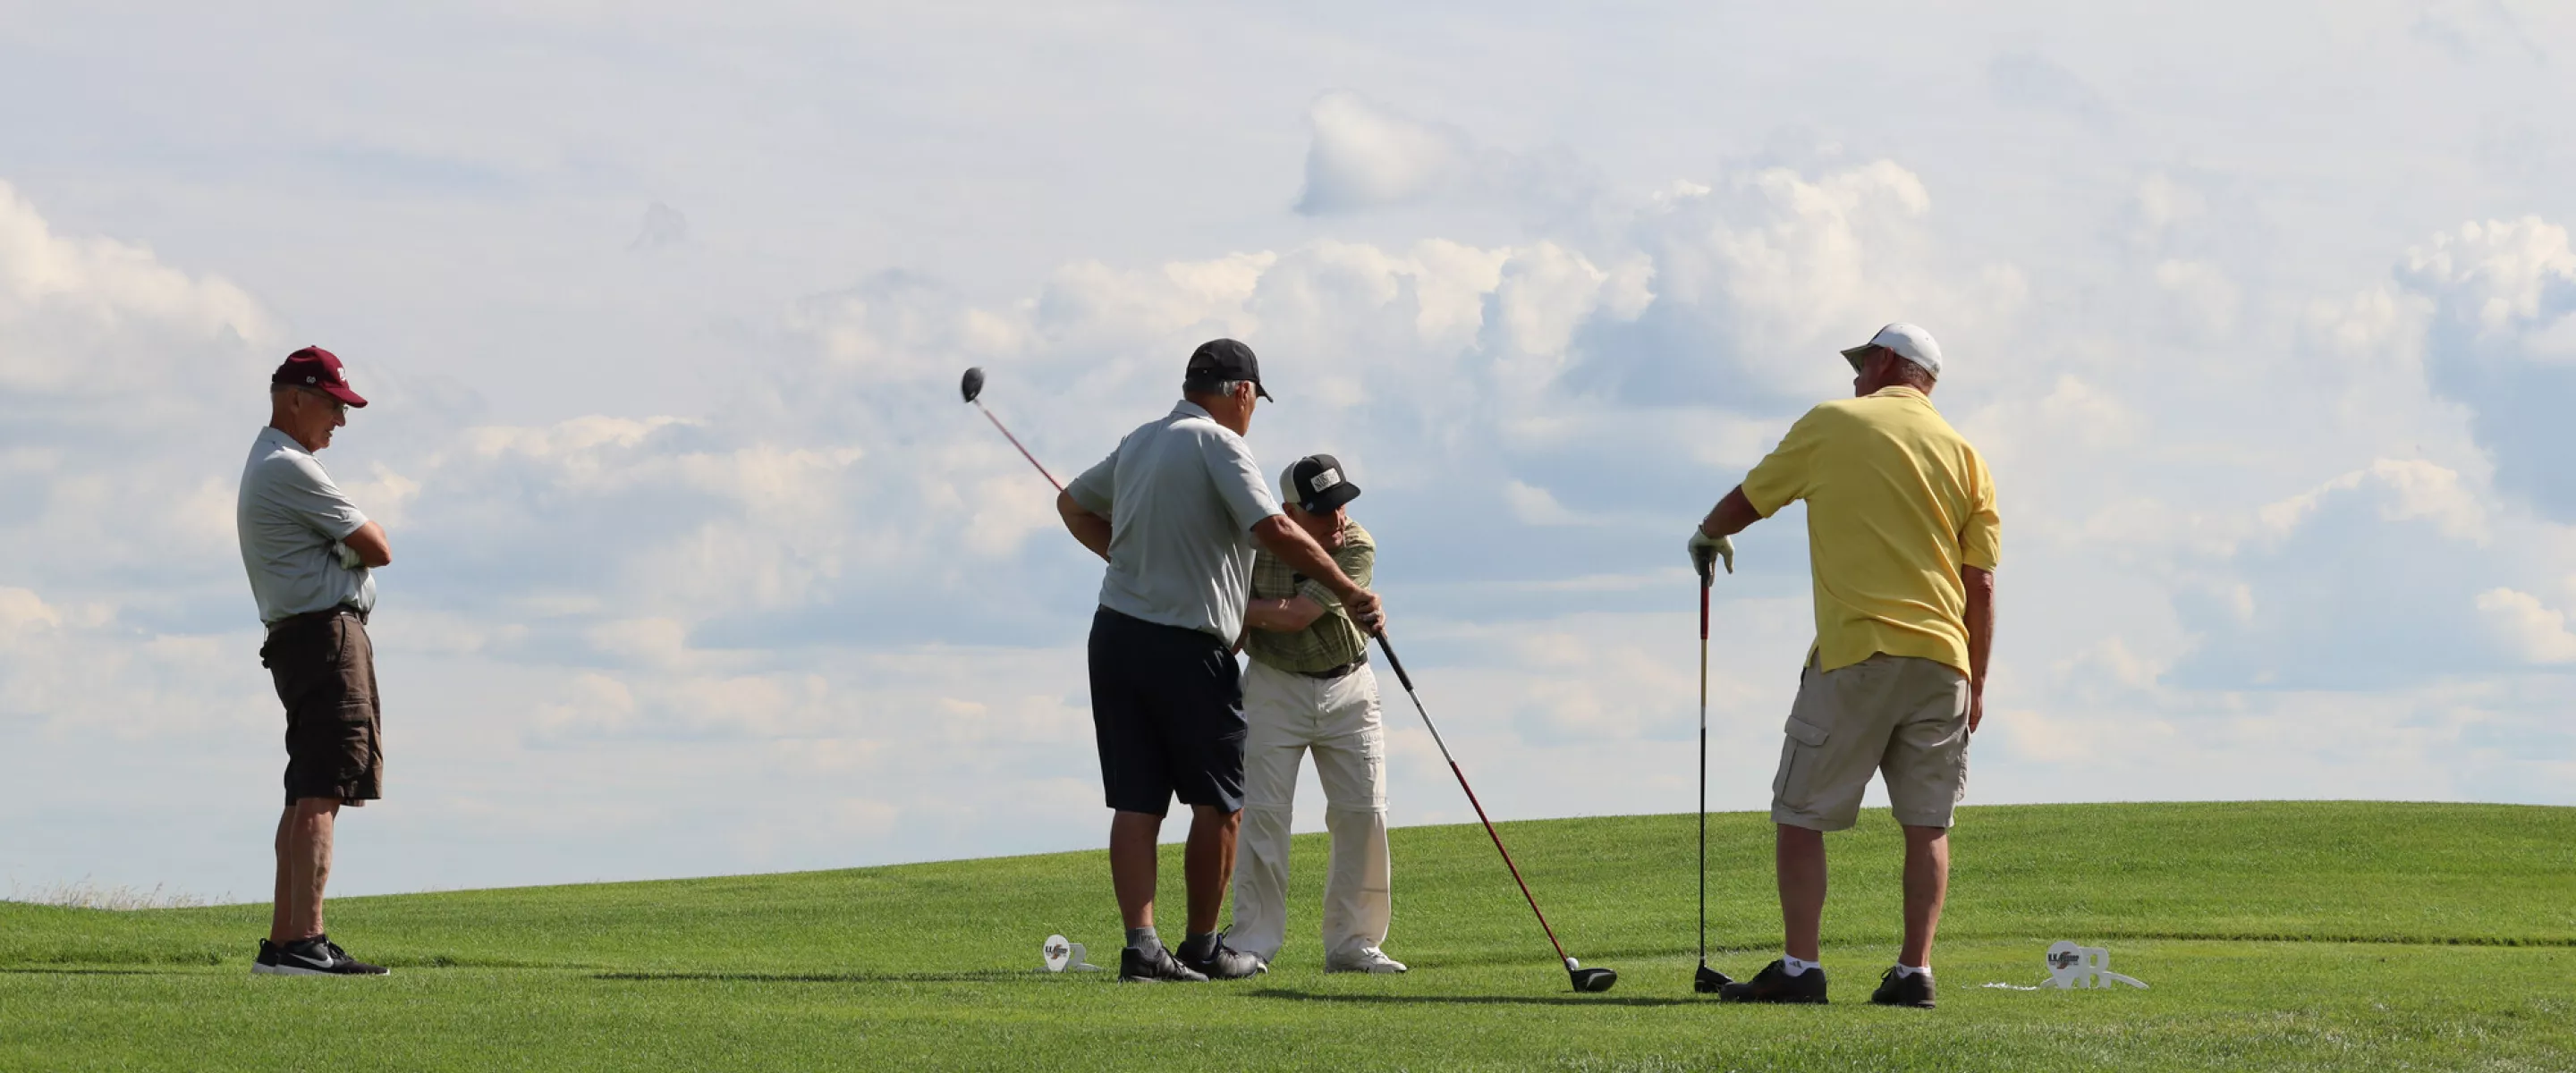 four golfers on a green in front of a blue sky